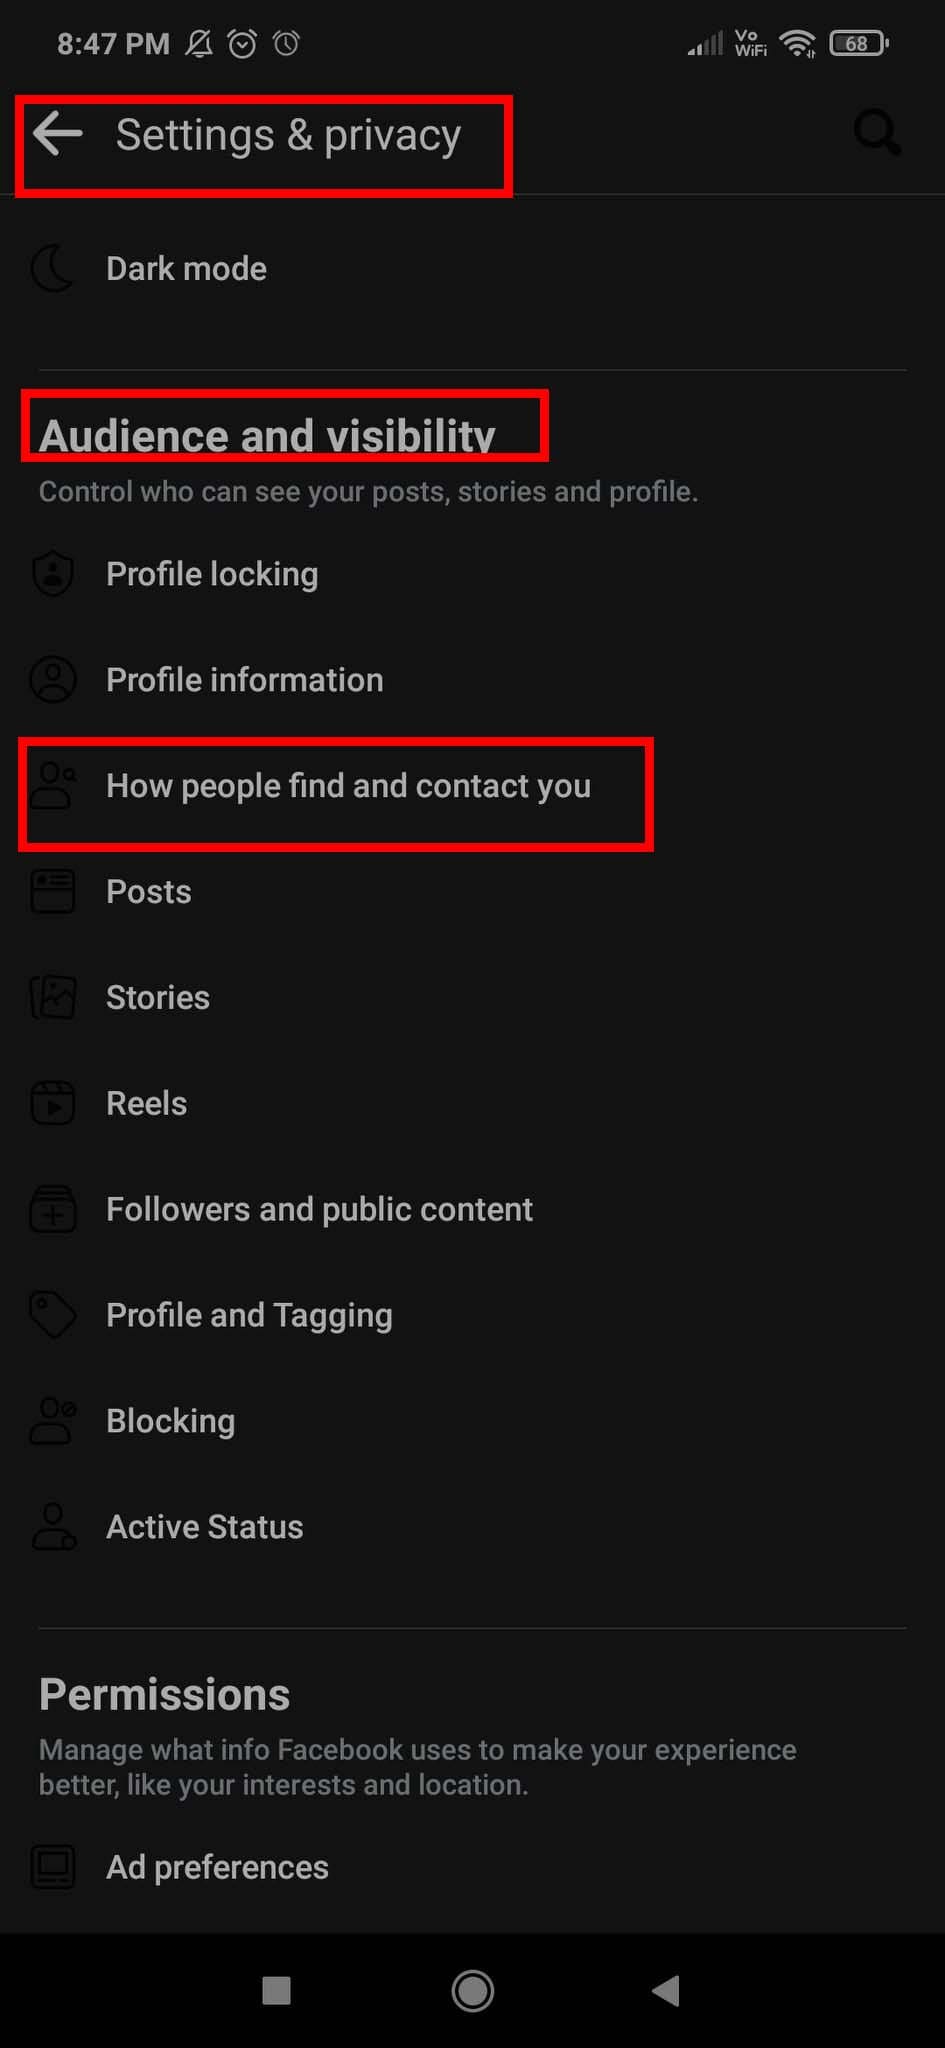 Go to How people find and contact you